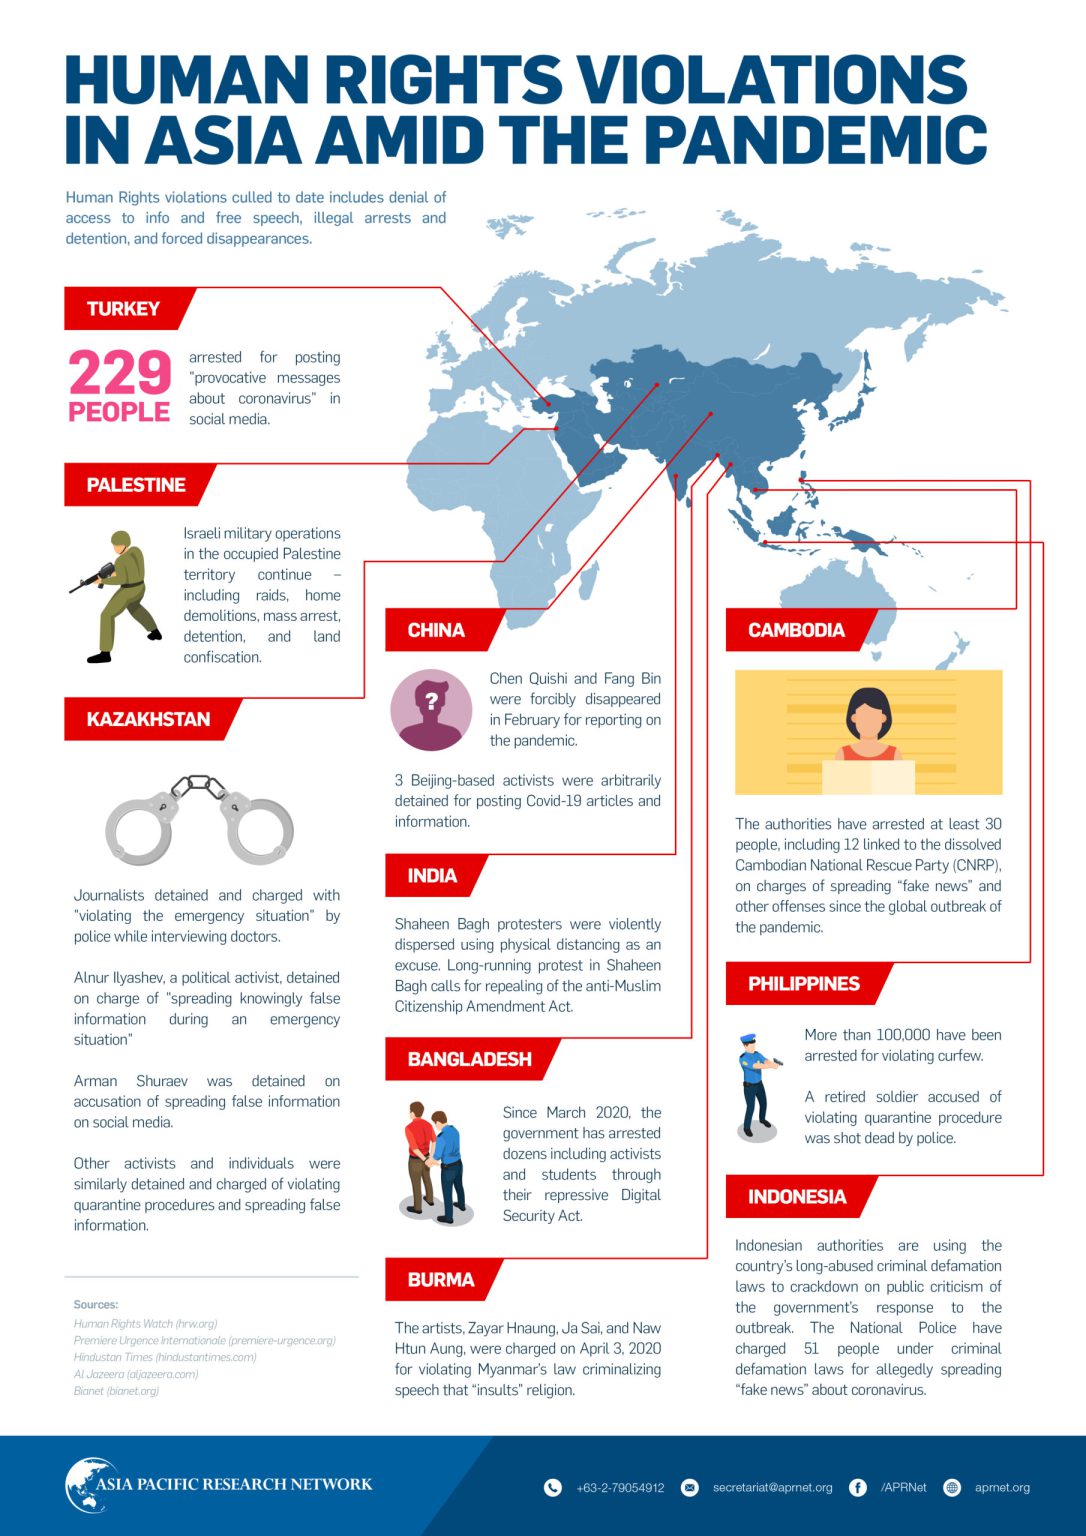 [INFOGRAPHIC] Human rights violations in Asia amid the pandemic